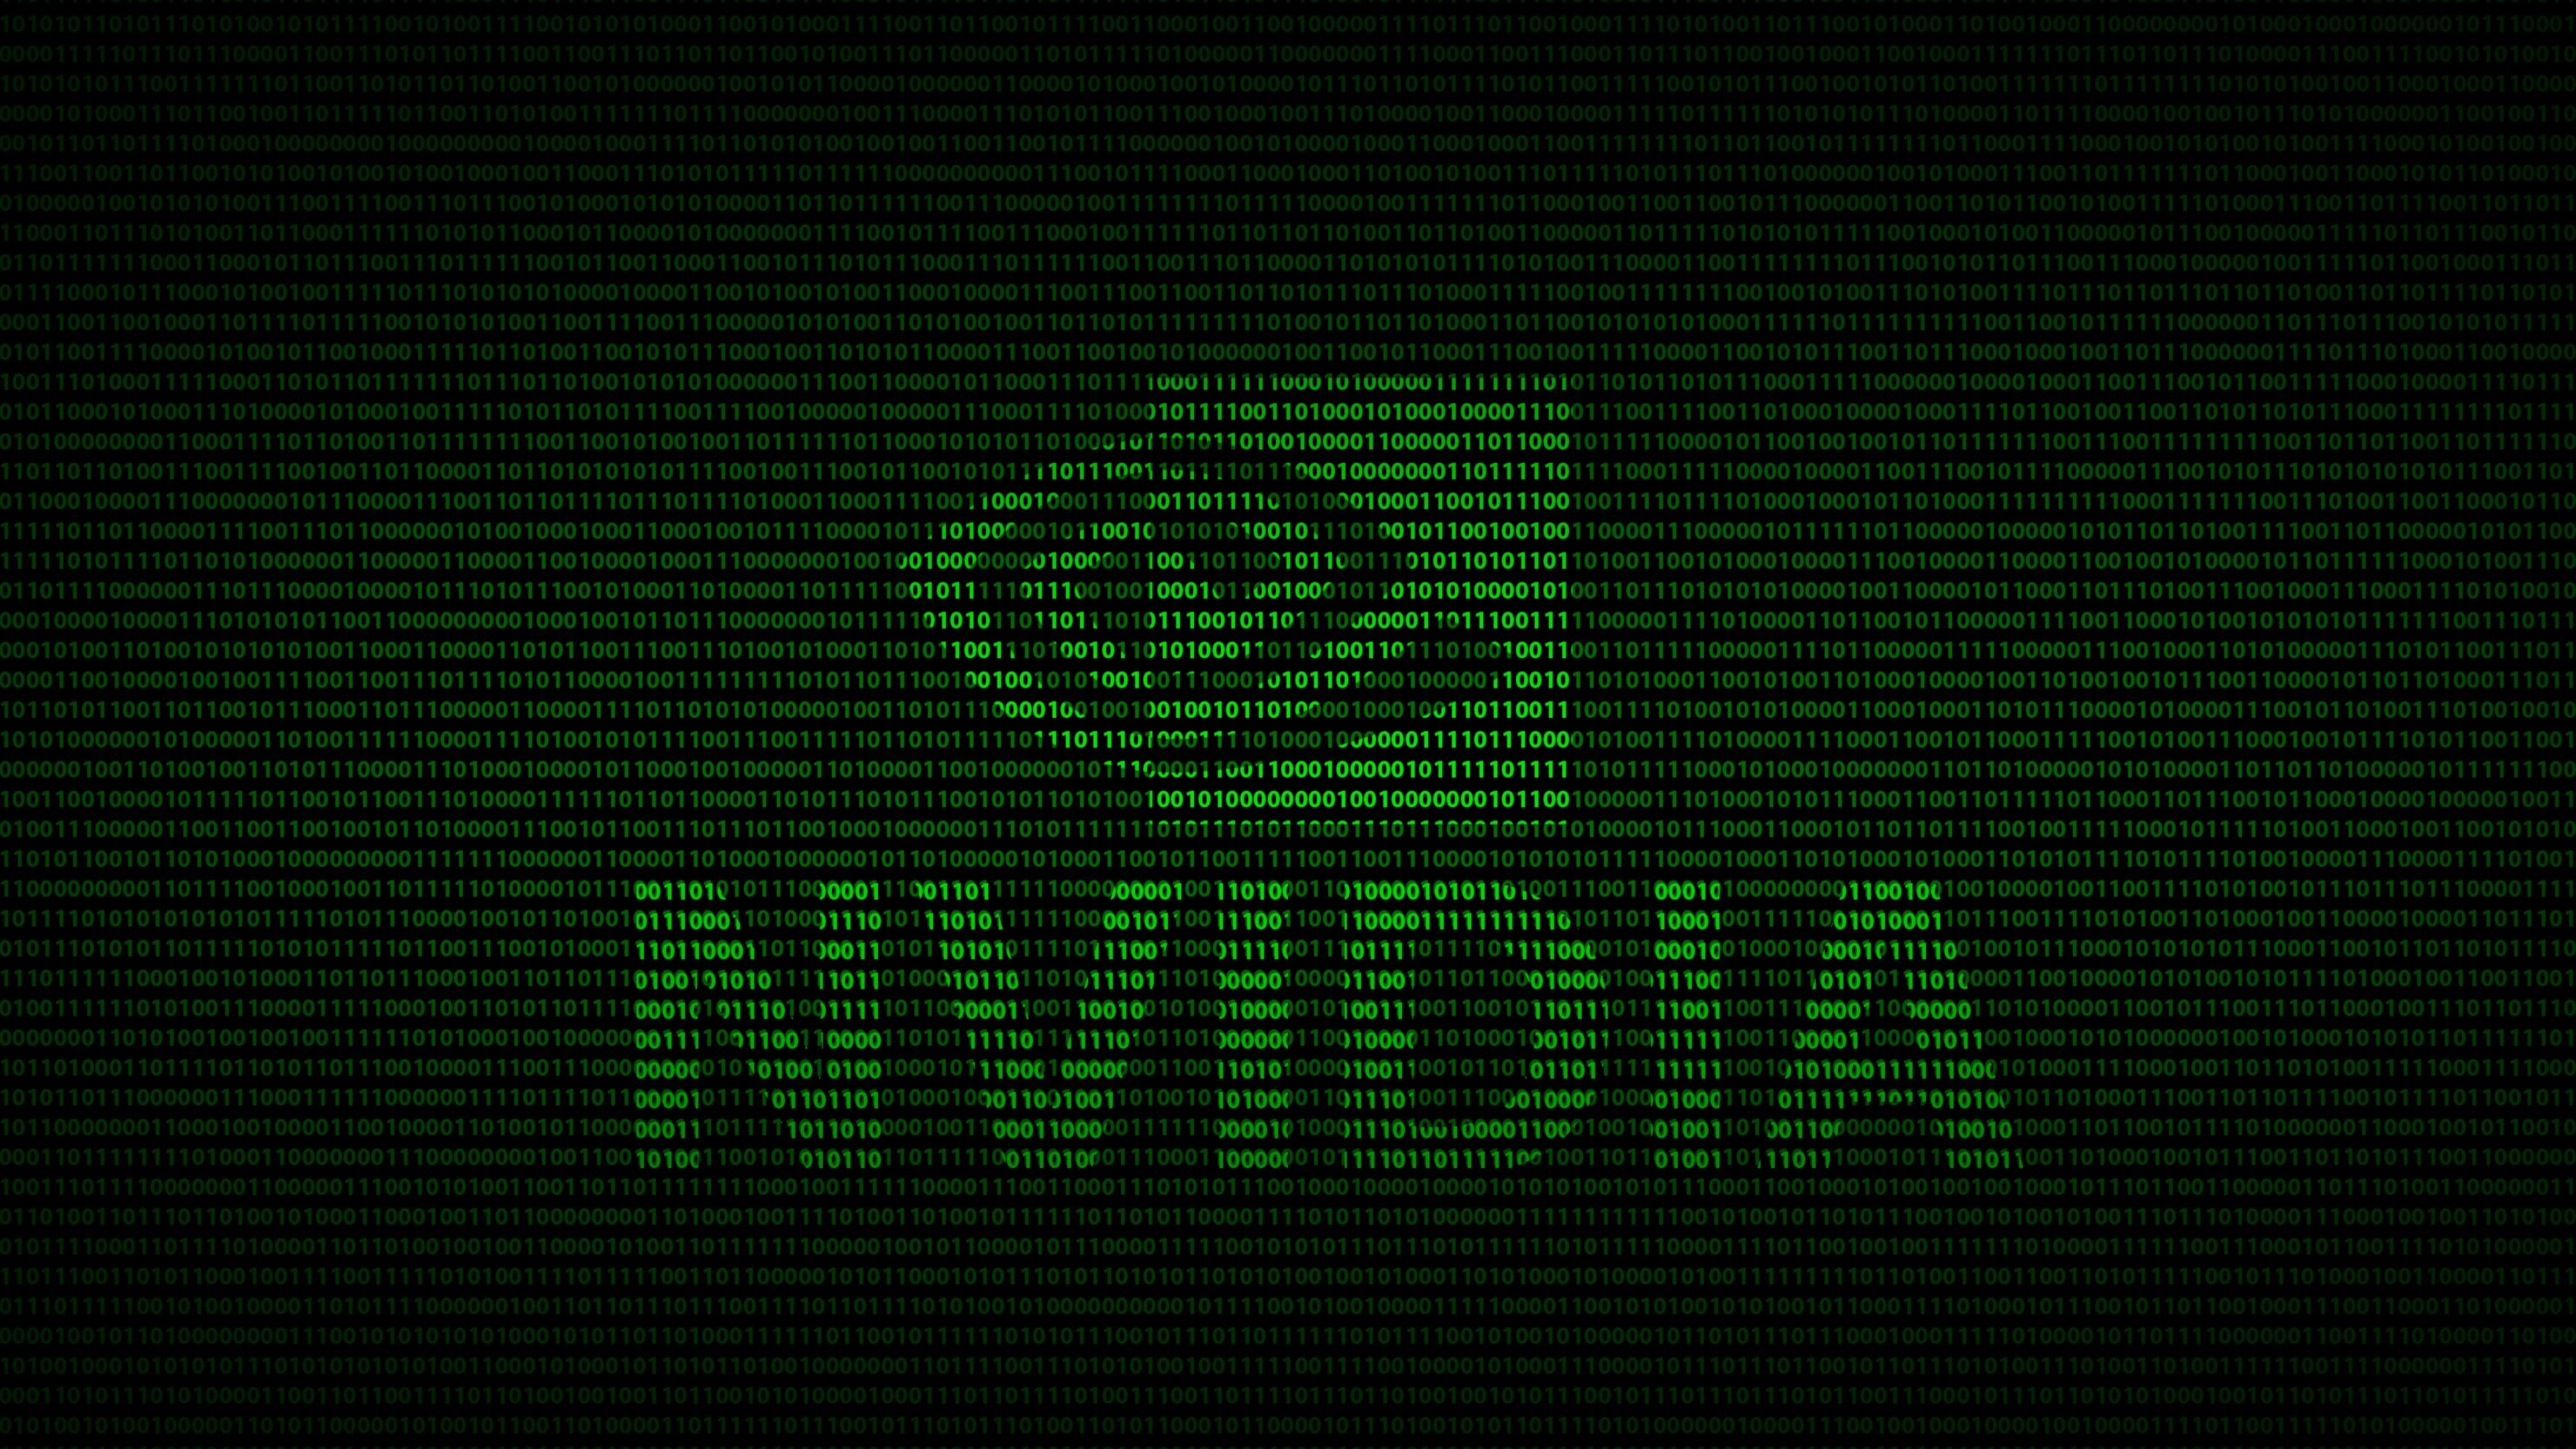 Nvidia: The way it's meant to be played, Slogan, The global leader in artificial intelligence hardware and software. 3840x2160 4K Background.